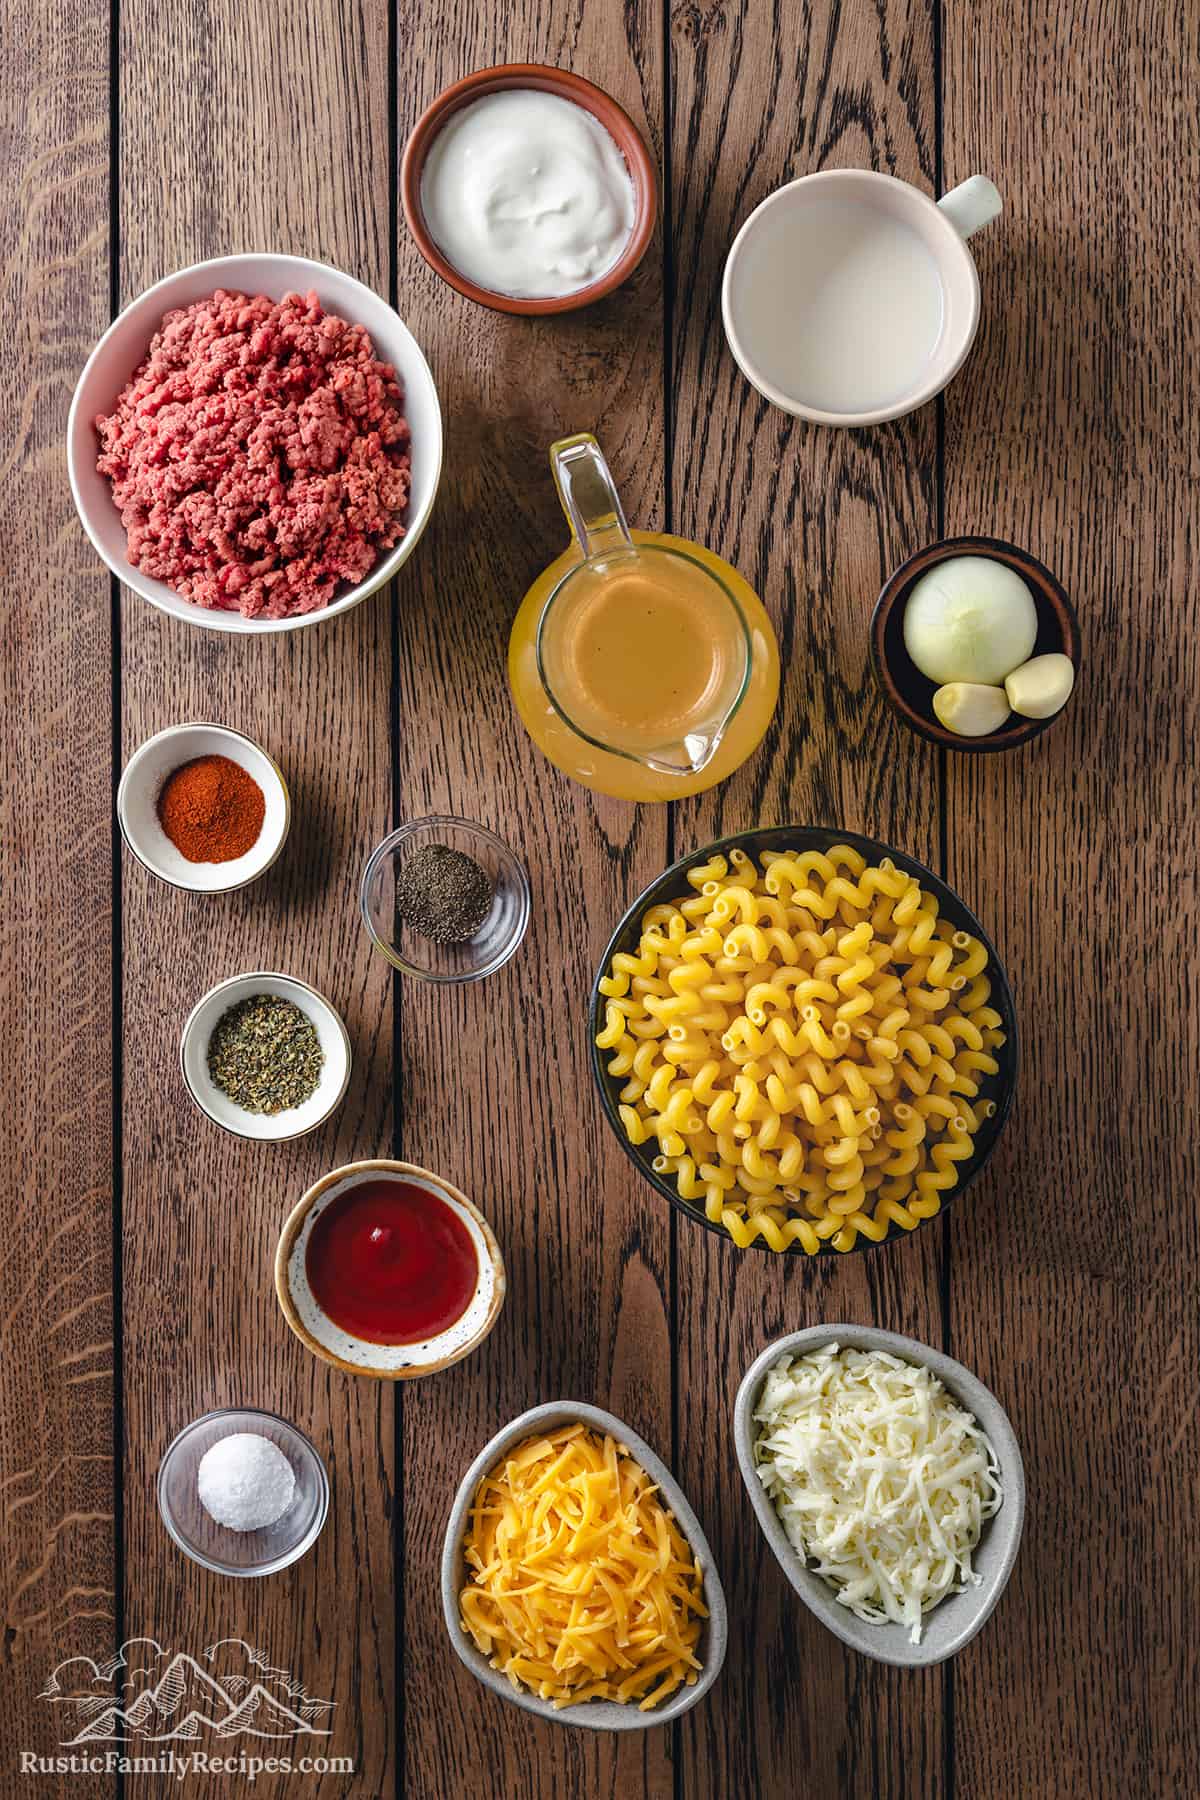 The ingredients for cheeseburger casserole.